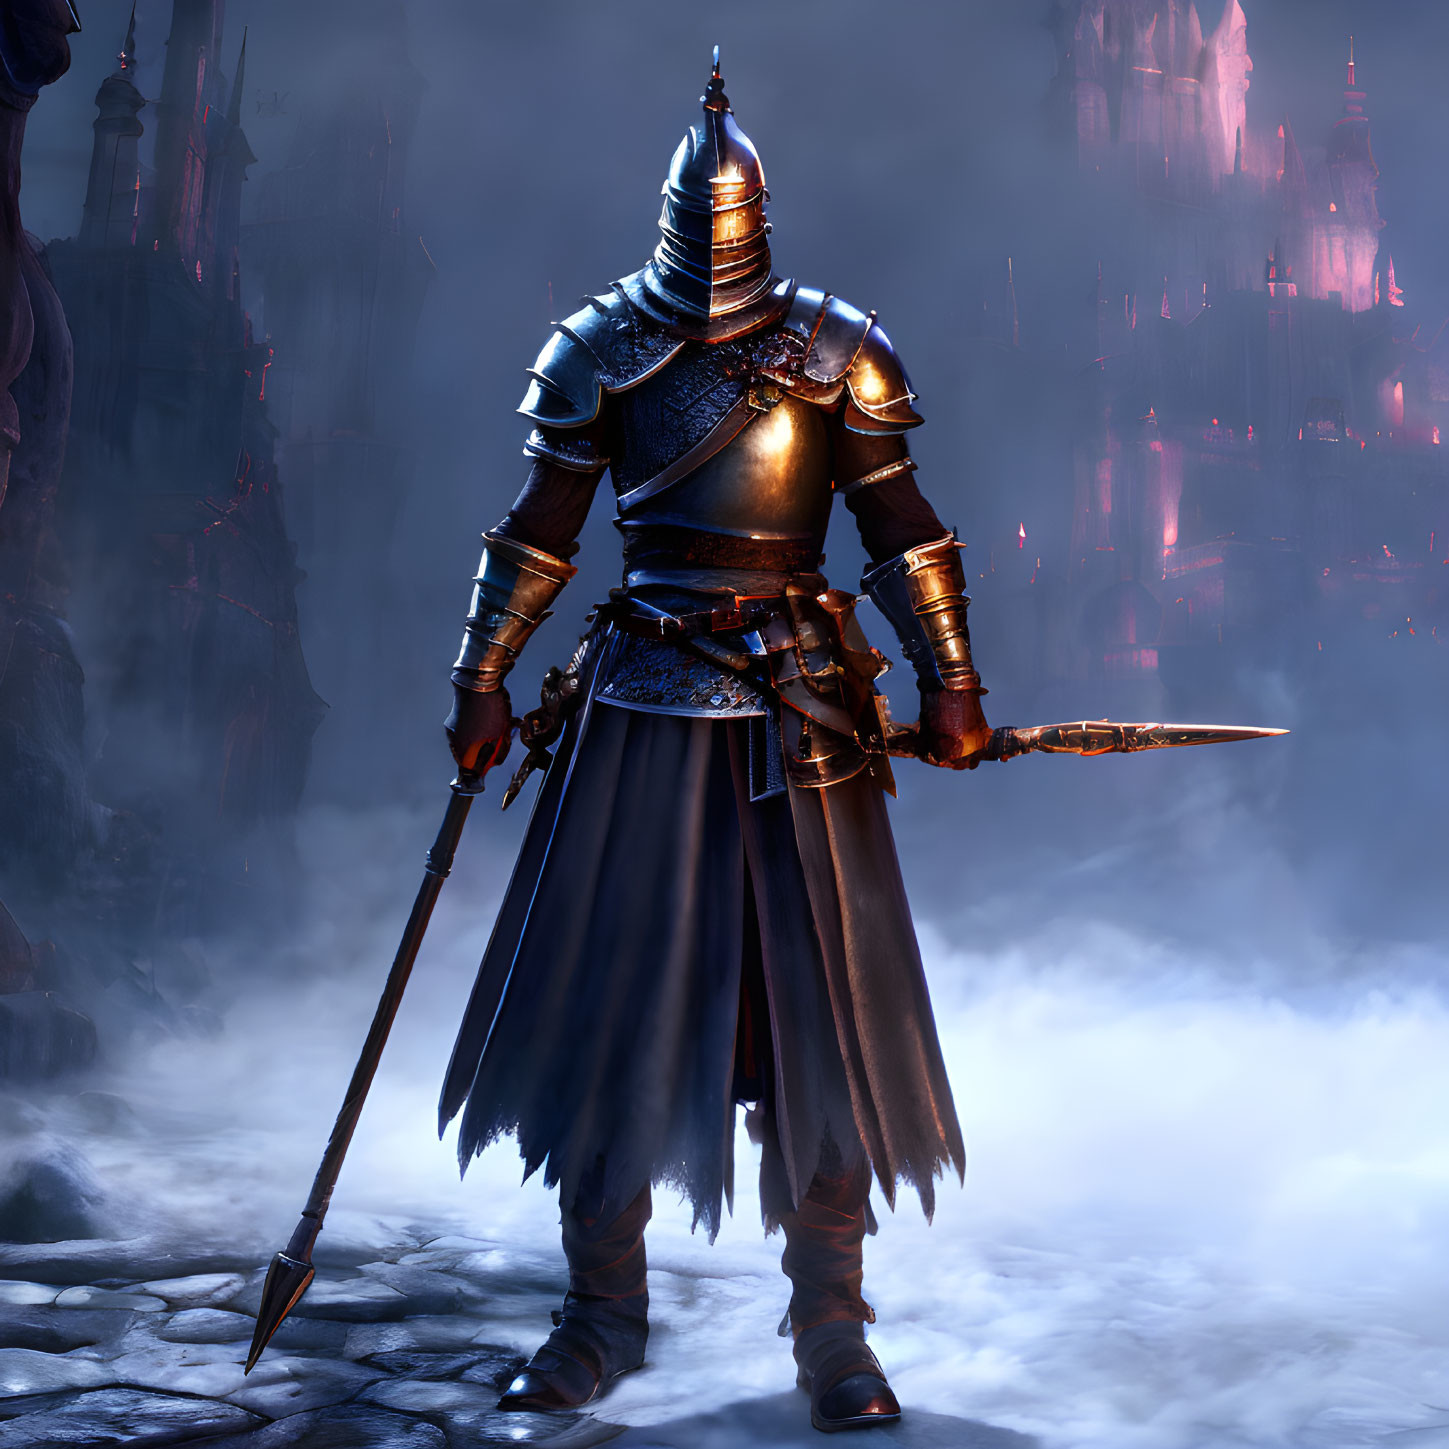 Armored knight with sword in misty gothic landscape